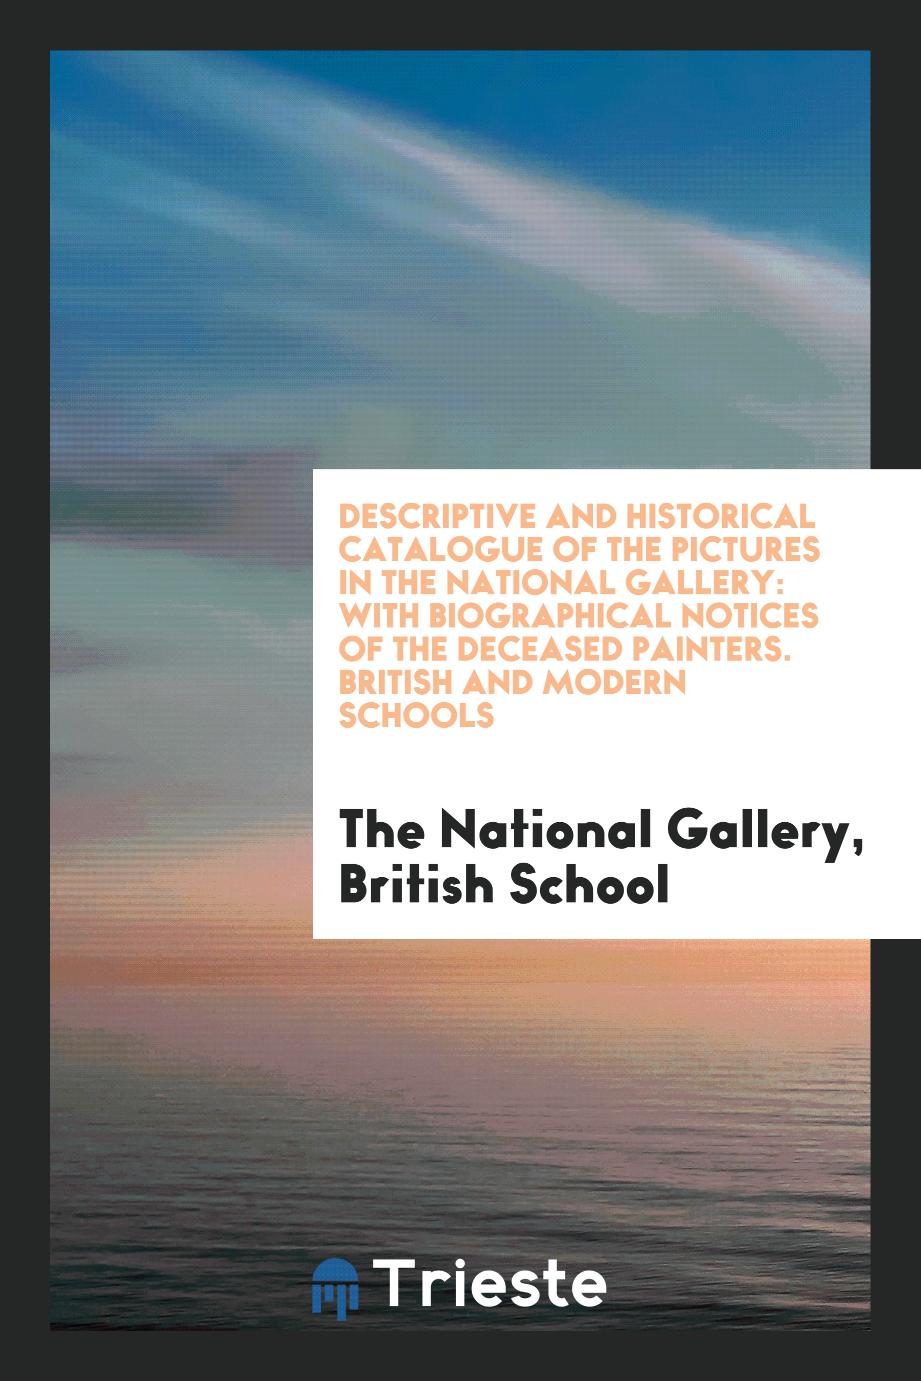 Descriptive and Historical Catalogue of the Pictures in the National Gallery: With Biographical Notices of the Deceased Painters. British and Modern Schools